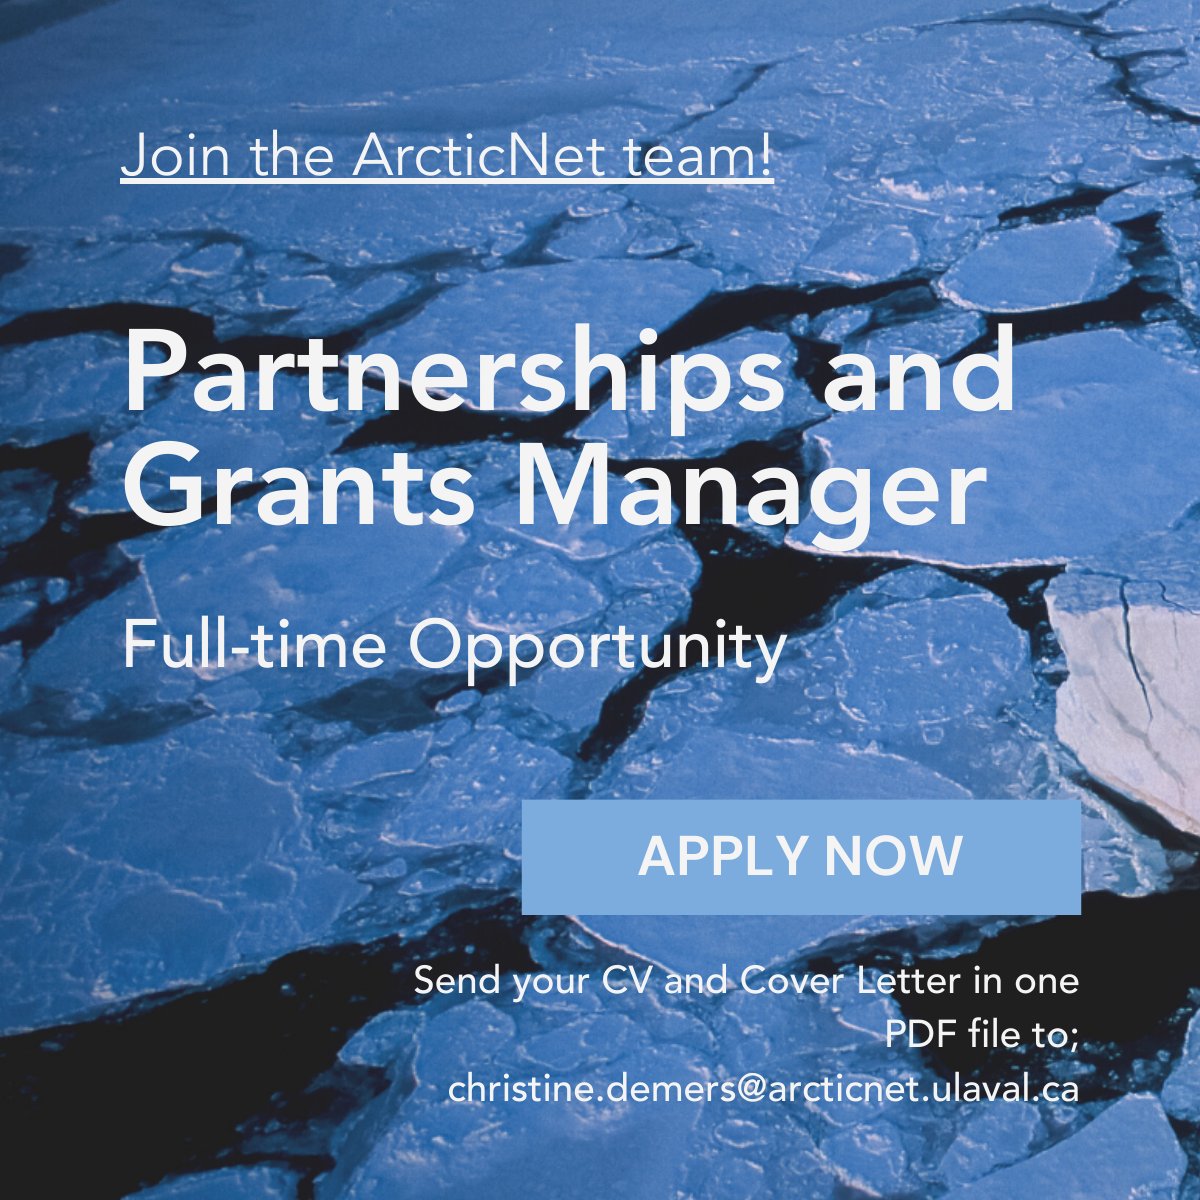 We're hiring! If you think you're right for the position, send your CV and cover letter in one PDF to: christine.demers@arcticnet.ulaval.ca. To view the job posting, click here; linkedin.com/jobs/view/3901…